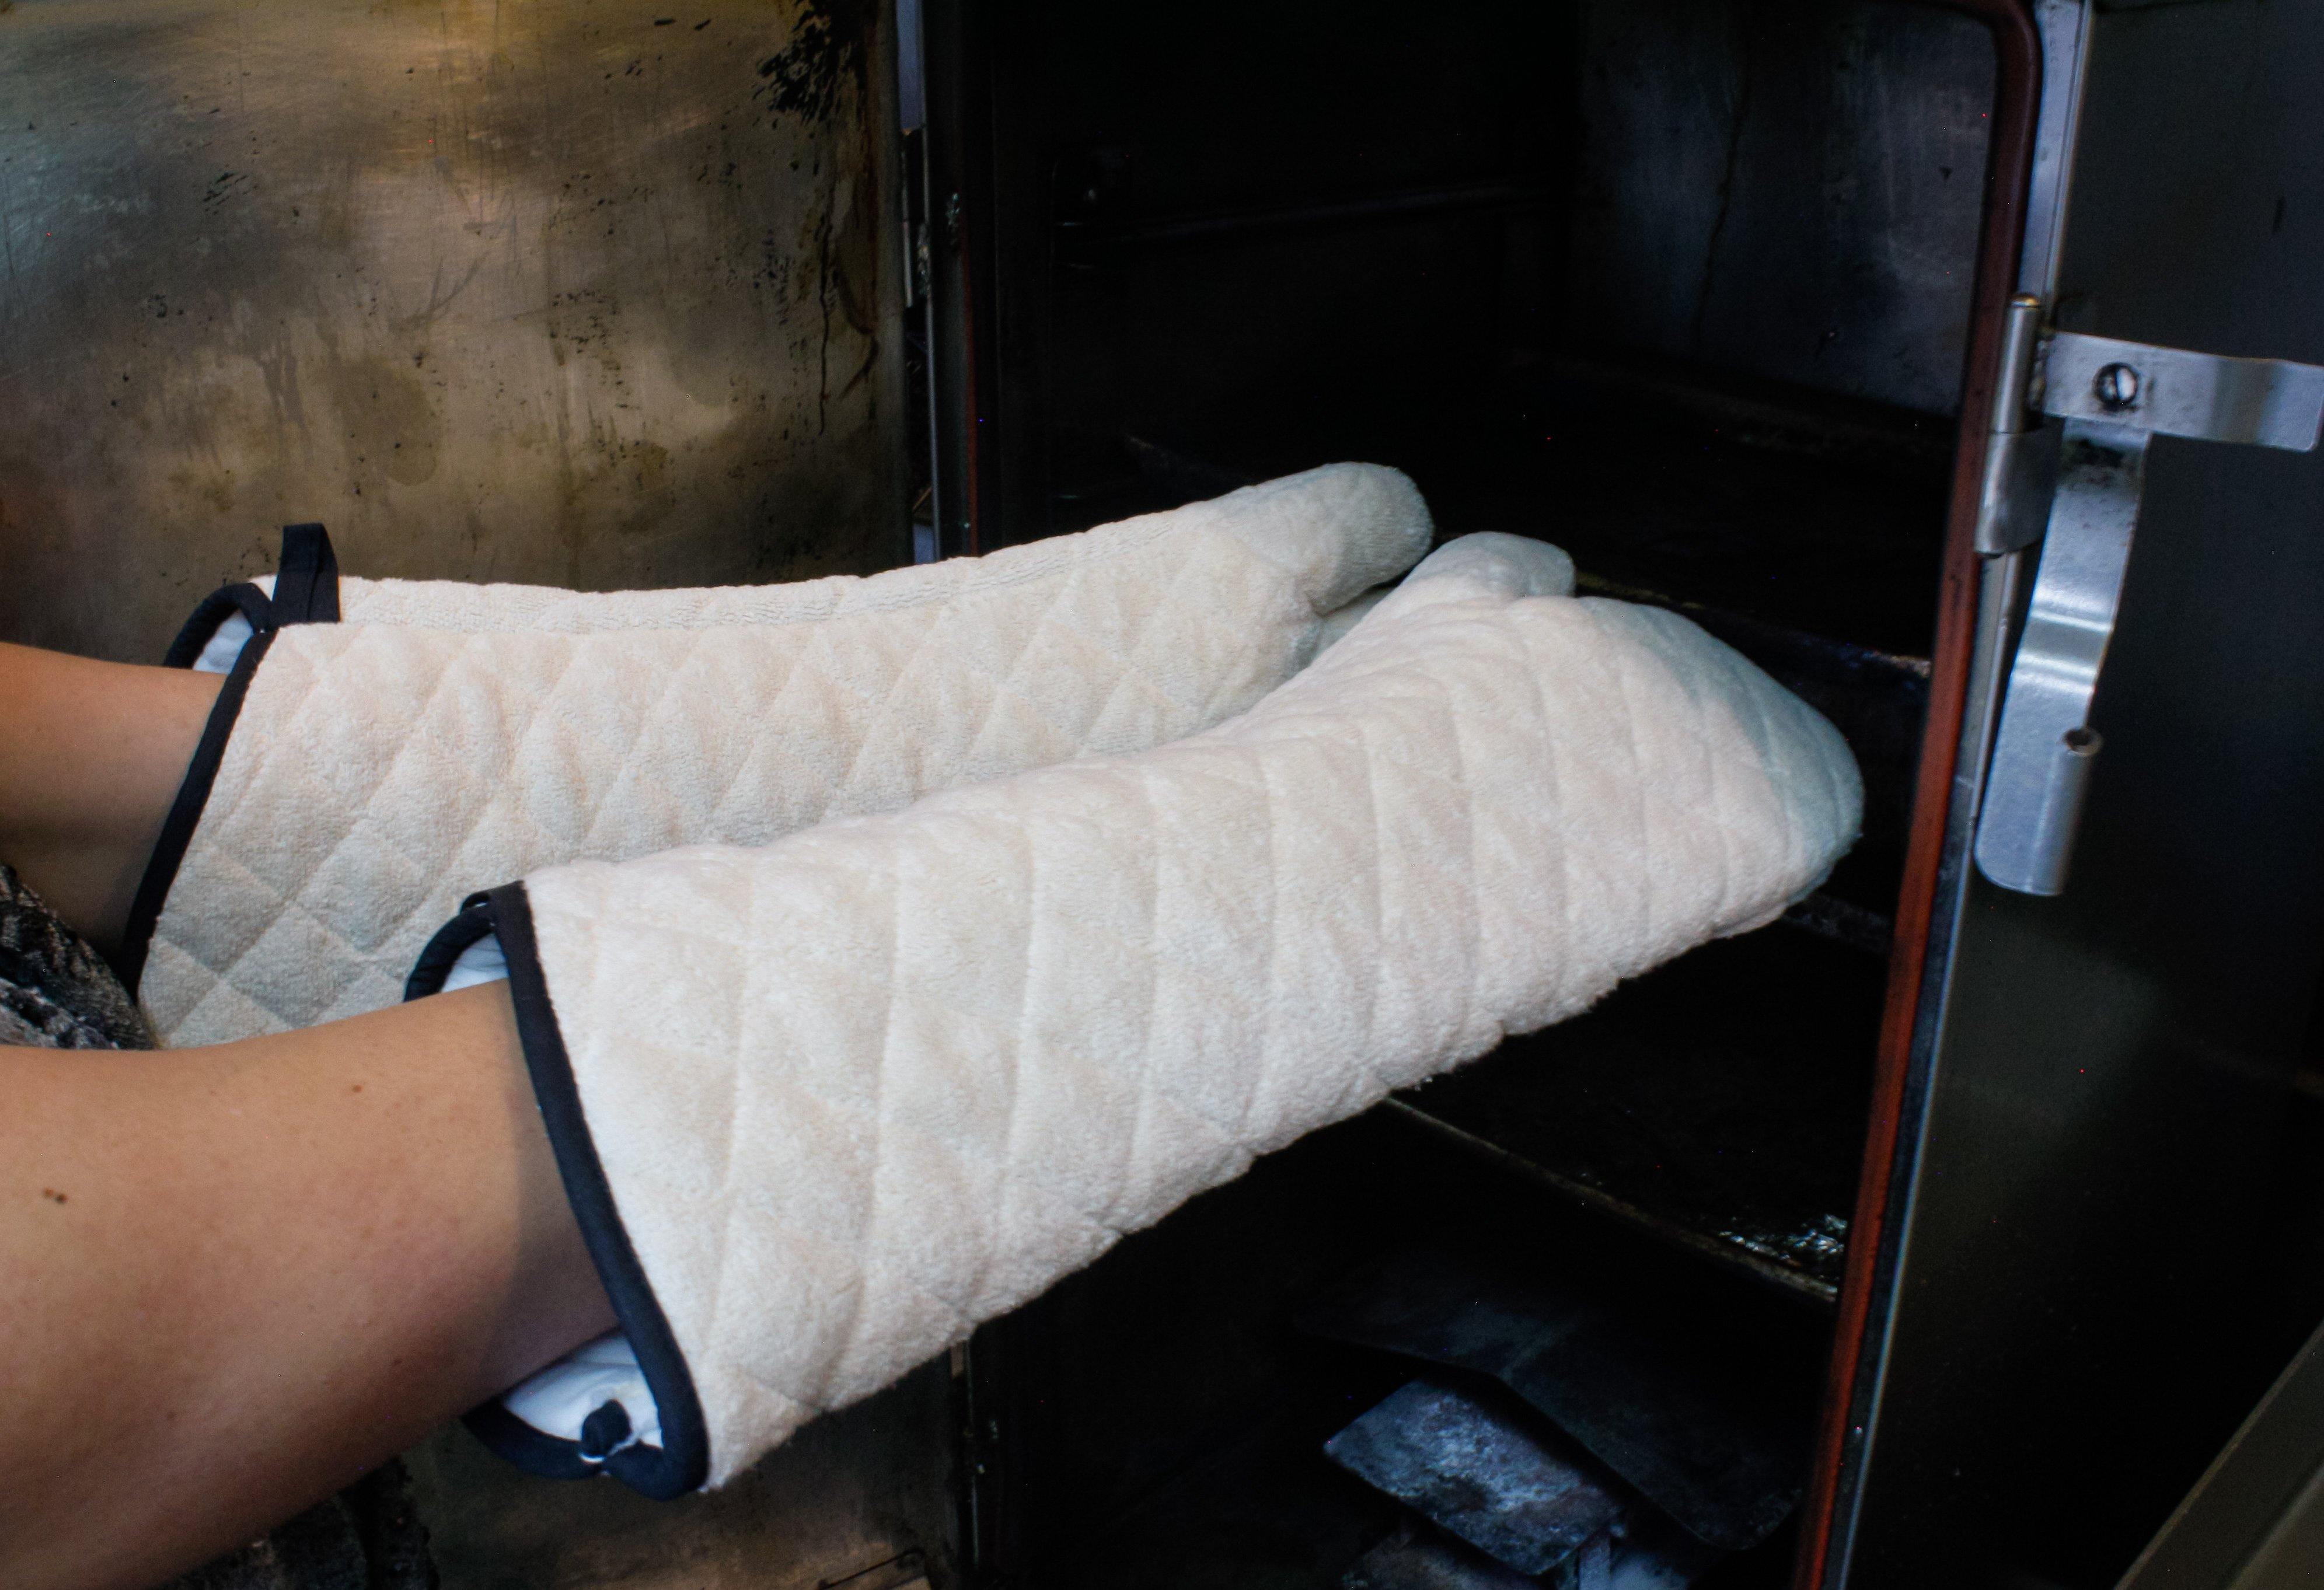 24 Black Quilted Canvas Oven Mitts, 450 Degree Heat Resistance, Sold By  Pair